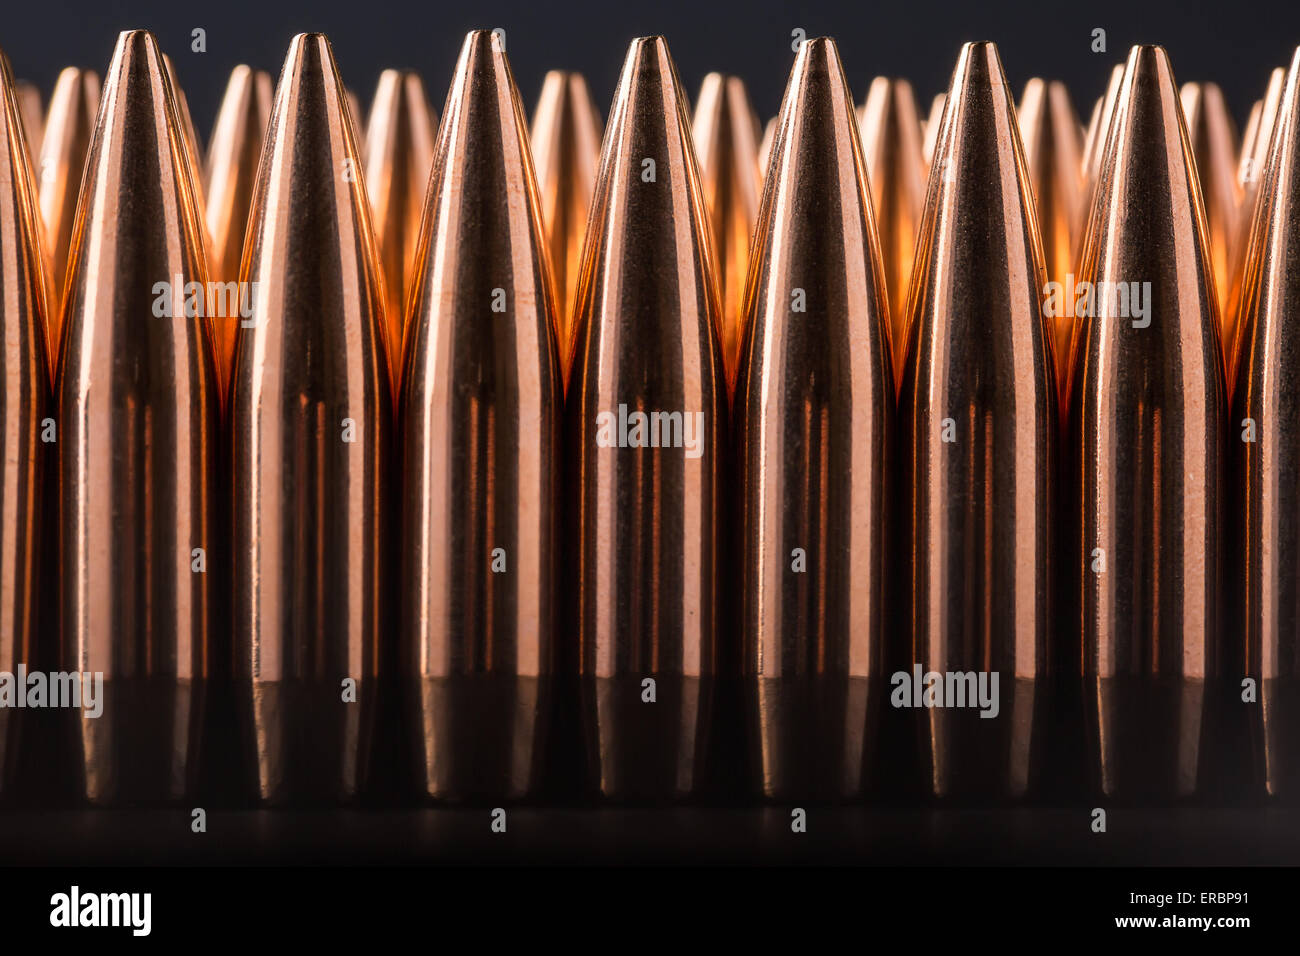 Macro shot of copper bullets that are in many row Stock Photo